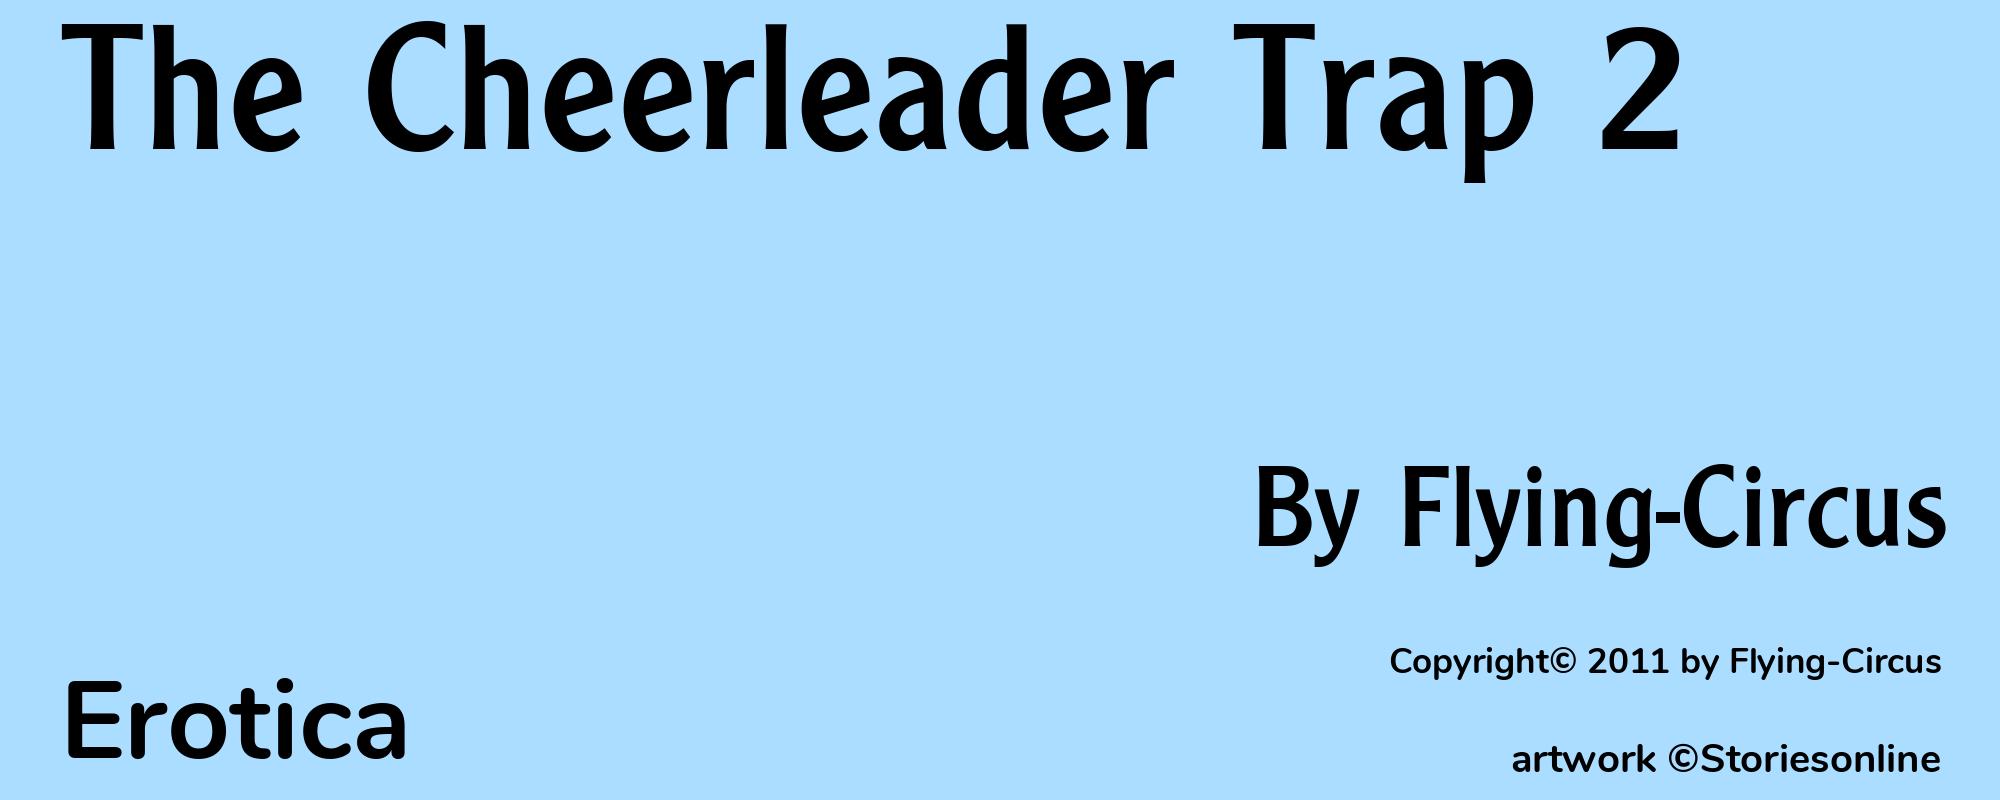 The Cheerleader Trap 2 - Cover